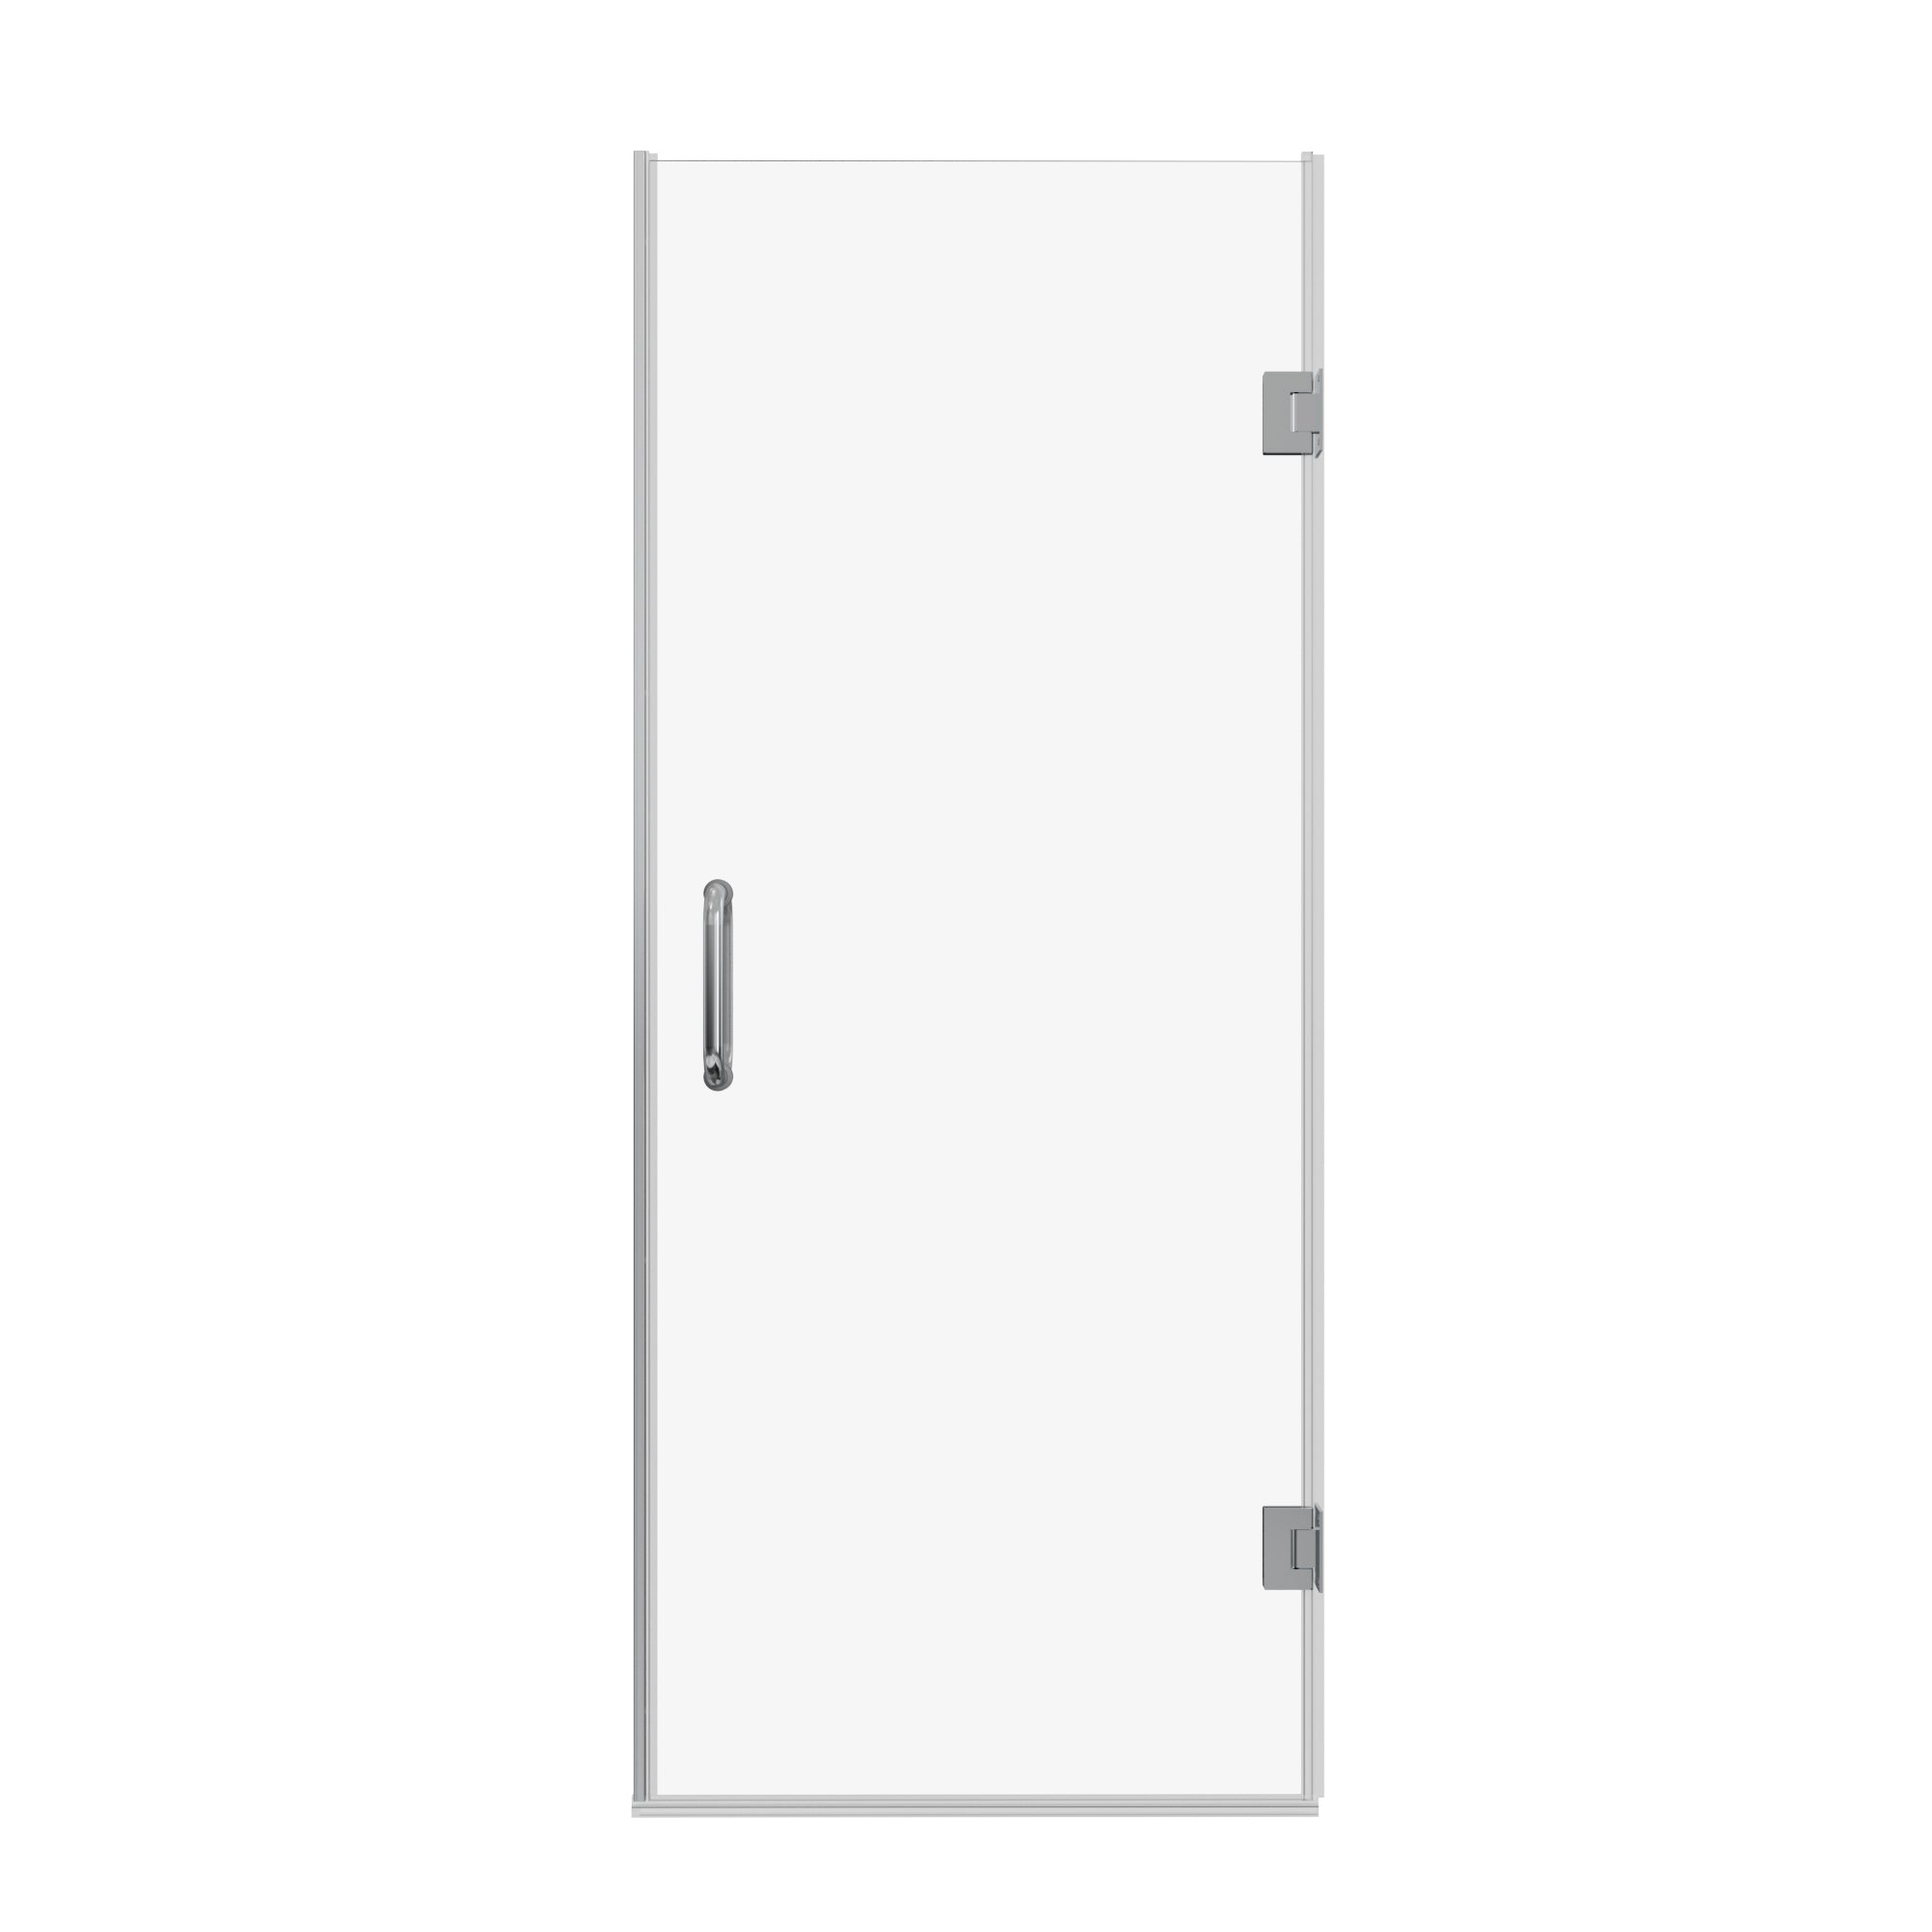 30'' W x 72'' H Frameless Shower Door in Chrome with Clear Glass-Arrisea